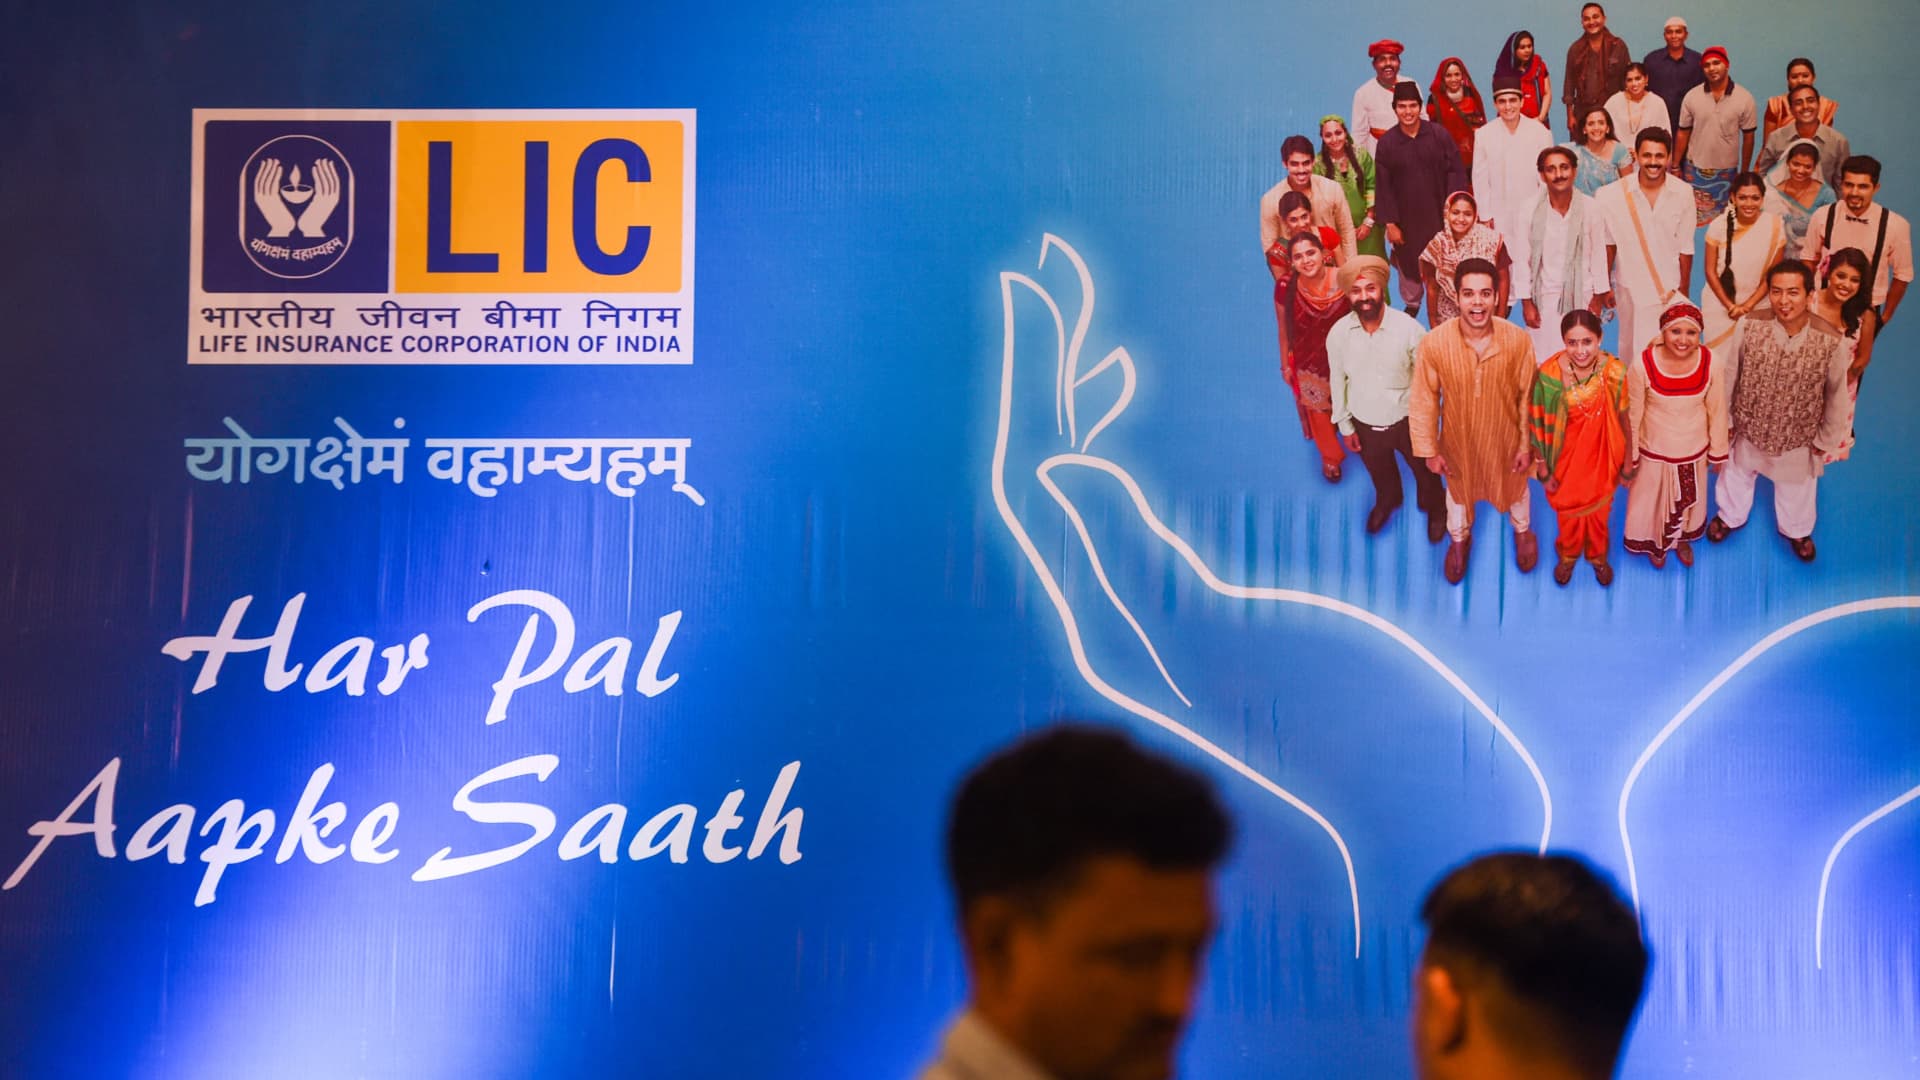 LIC, India's largest-ever IPO, will test foreign investor appetite